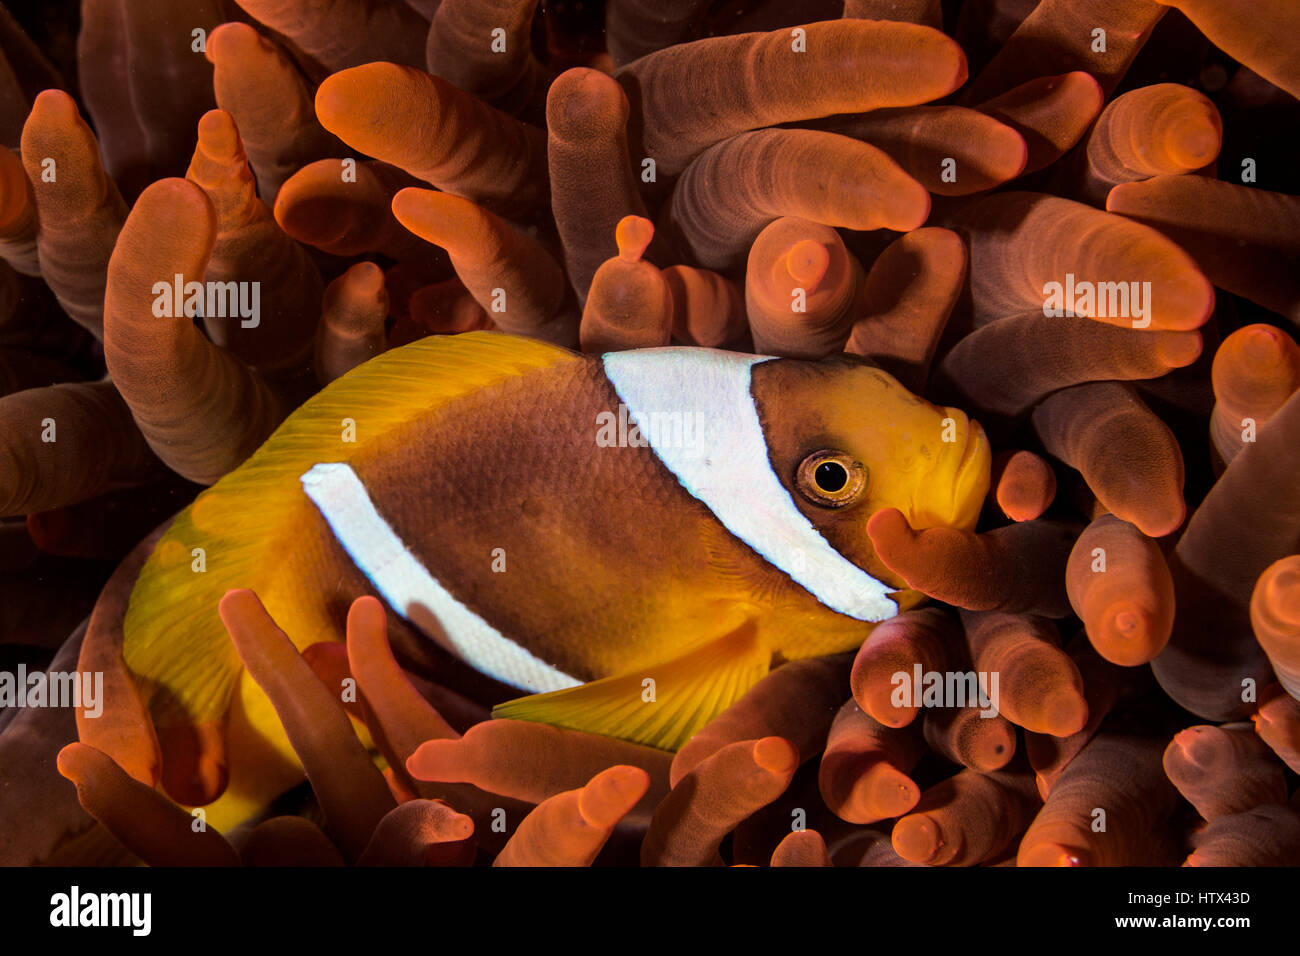 Red Sea clownfish (Amphiprion bicinctus) in a sea anemone, Red Sea, Egypt Stock Photo